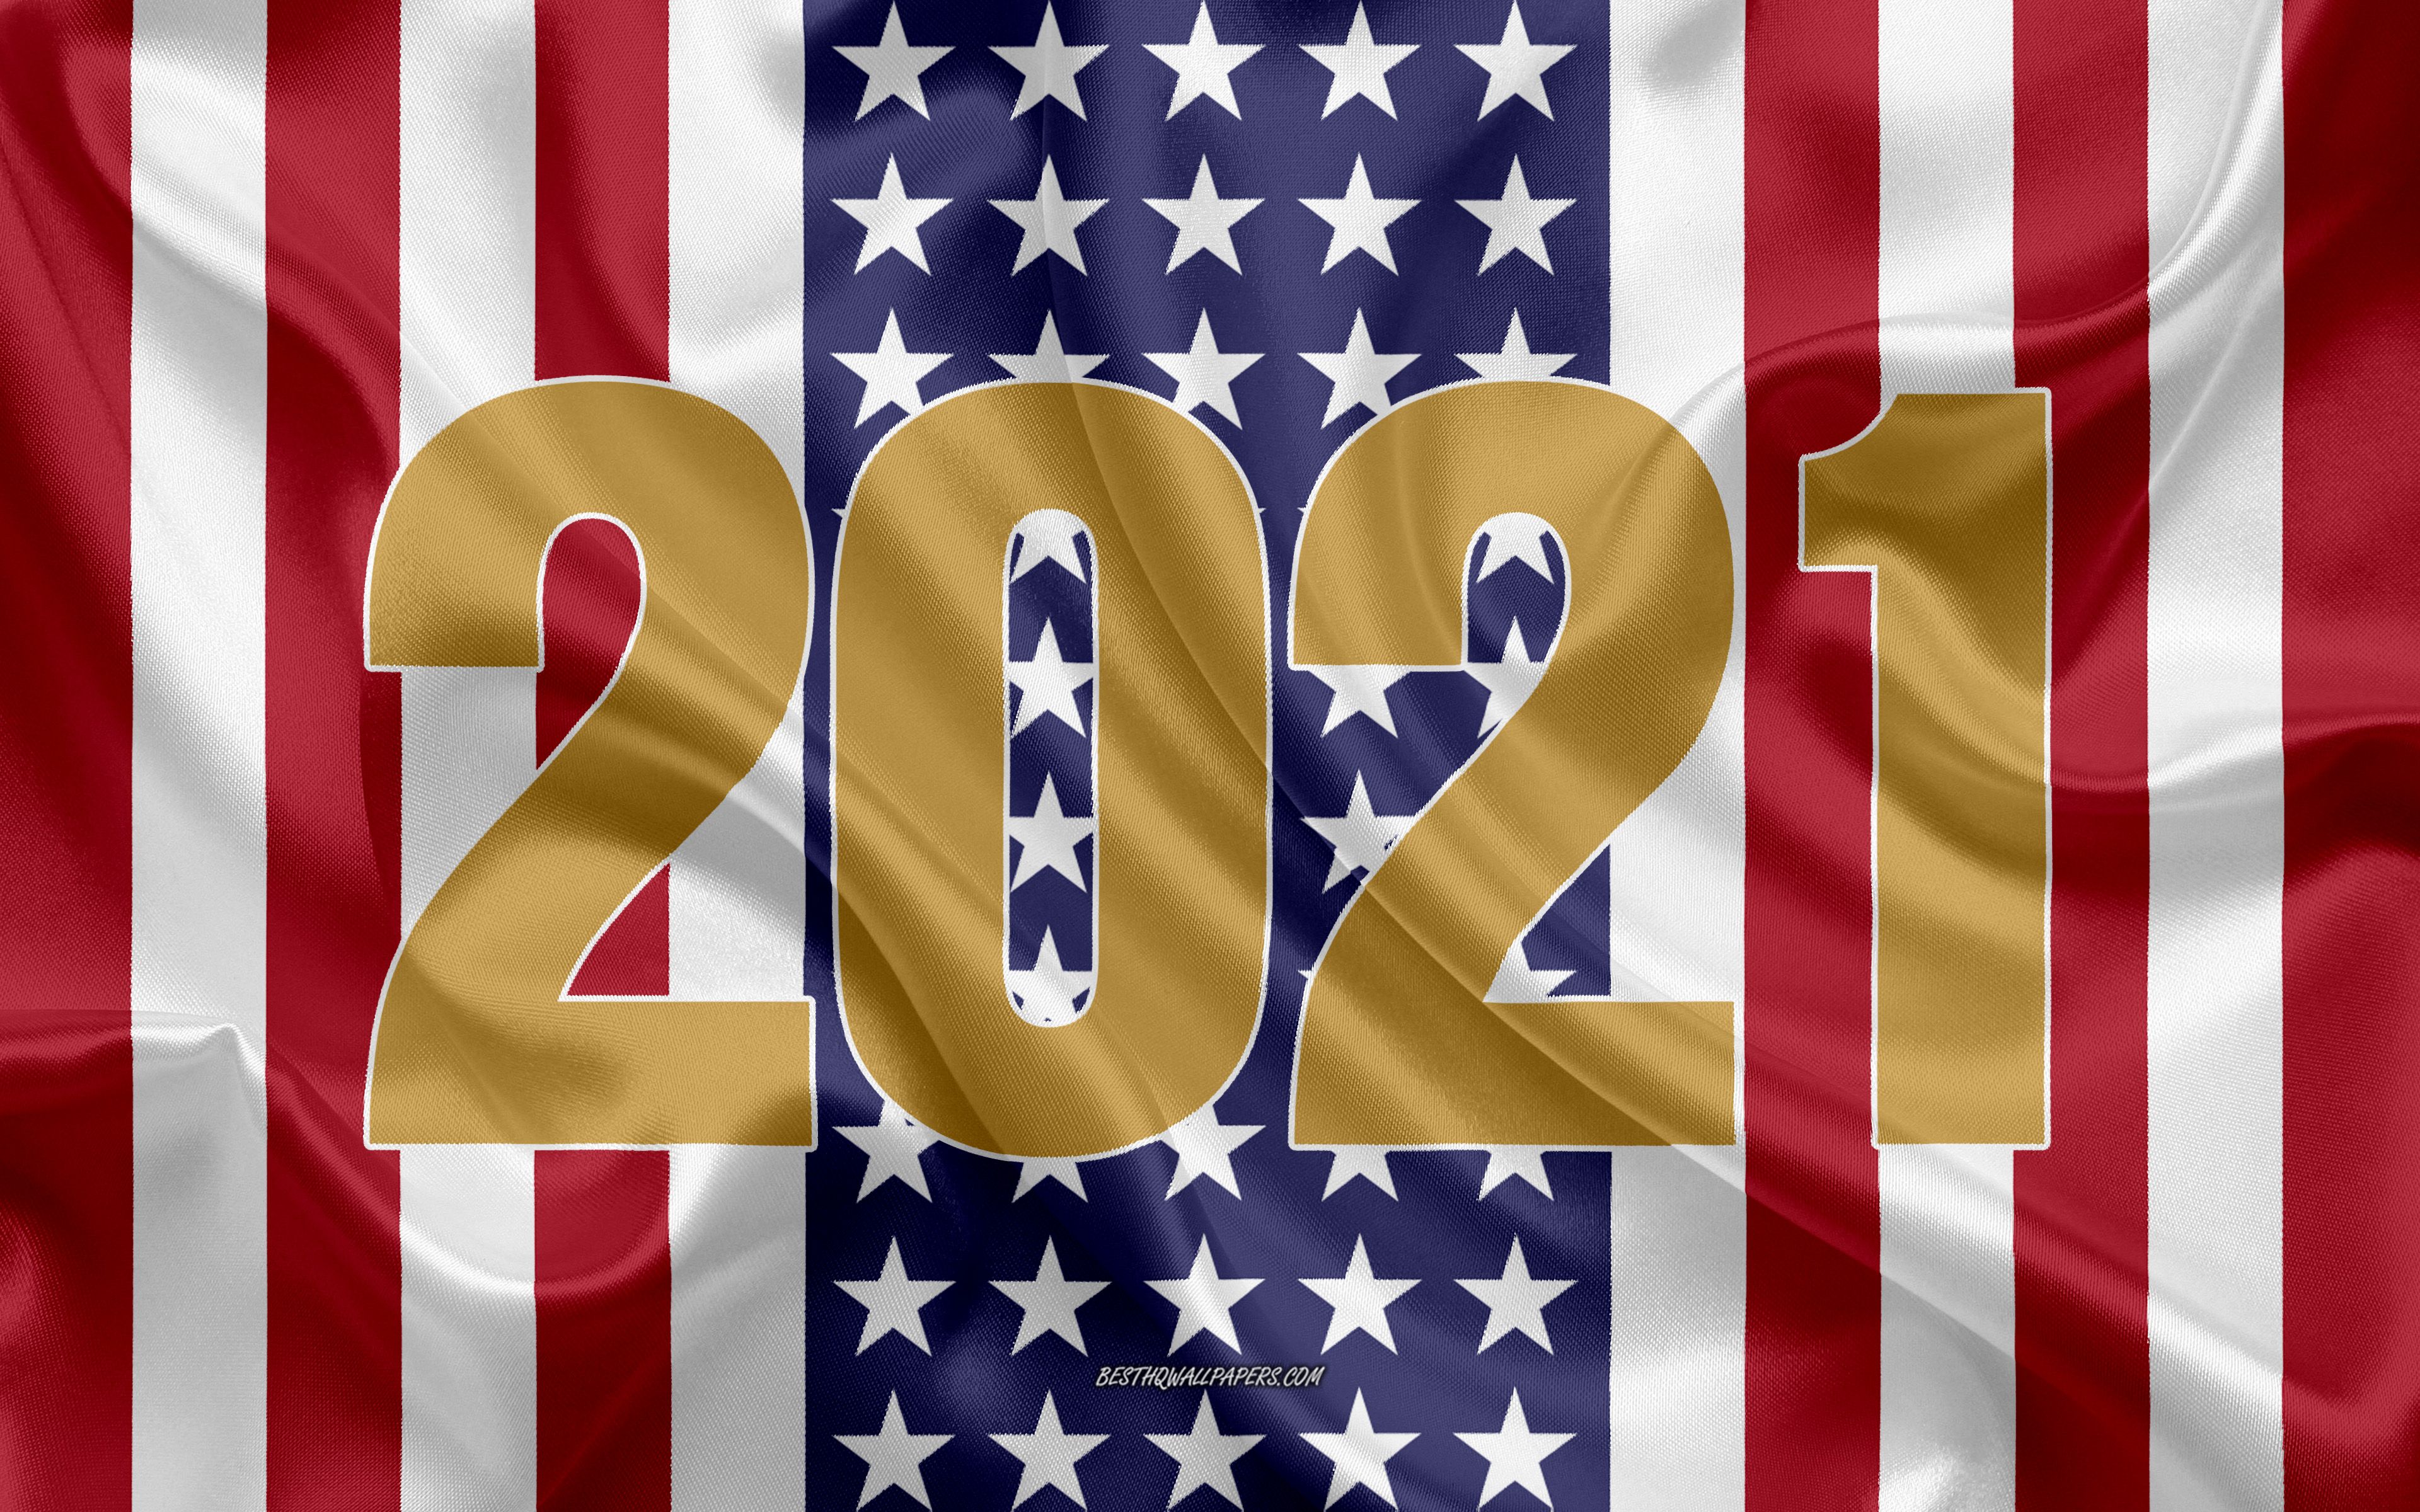 Download wallpaper Happy New Year 2021 USA, 2021 concepts, American flag, 4k, USA, 2021 New Year, 2021 greeting card for desktop with resolution 3840x2400. High Quality HD picture wallpaper